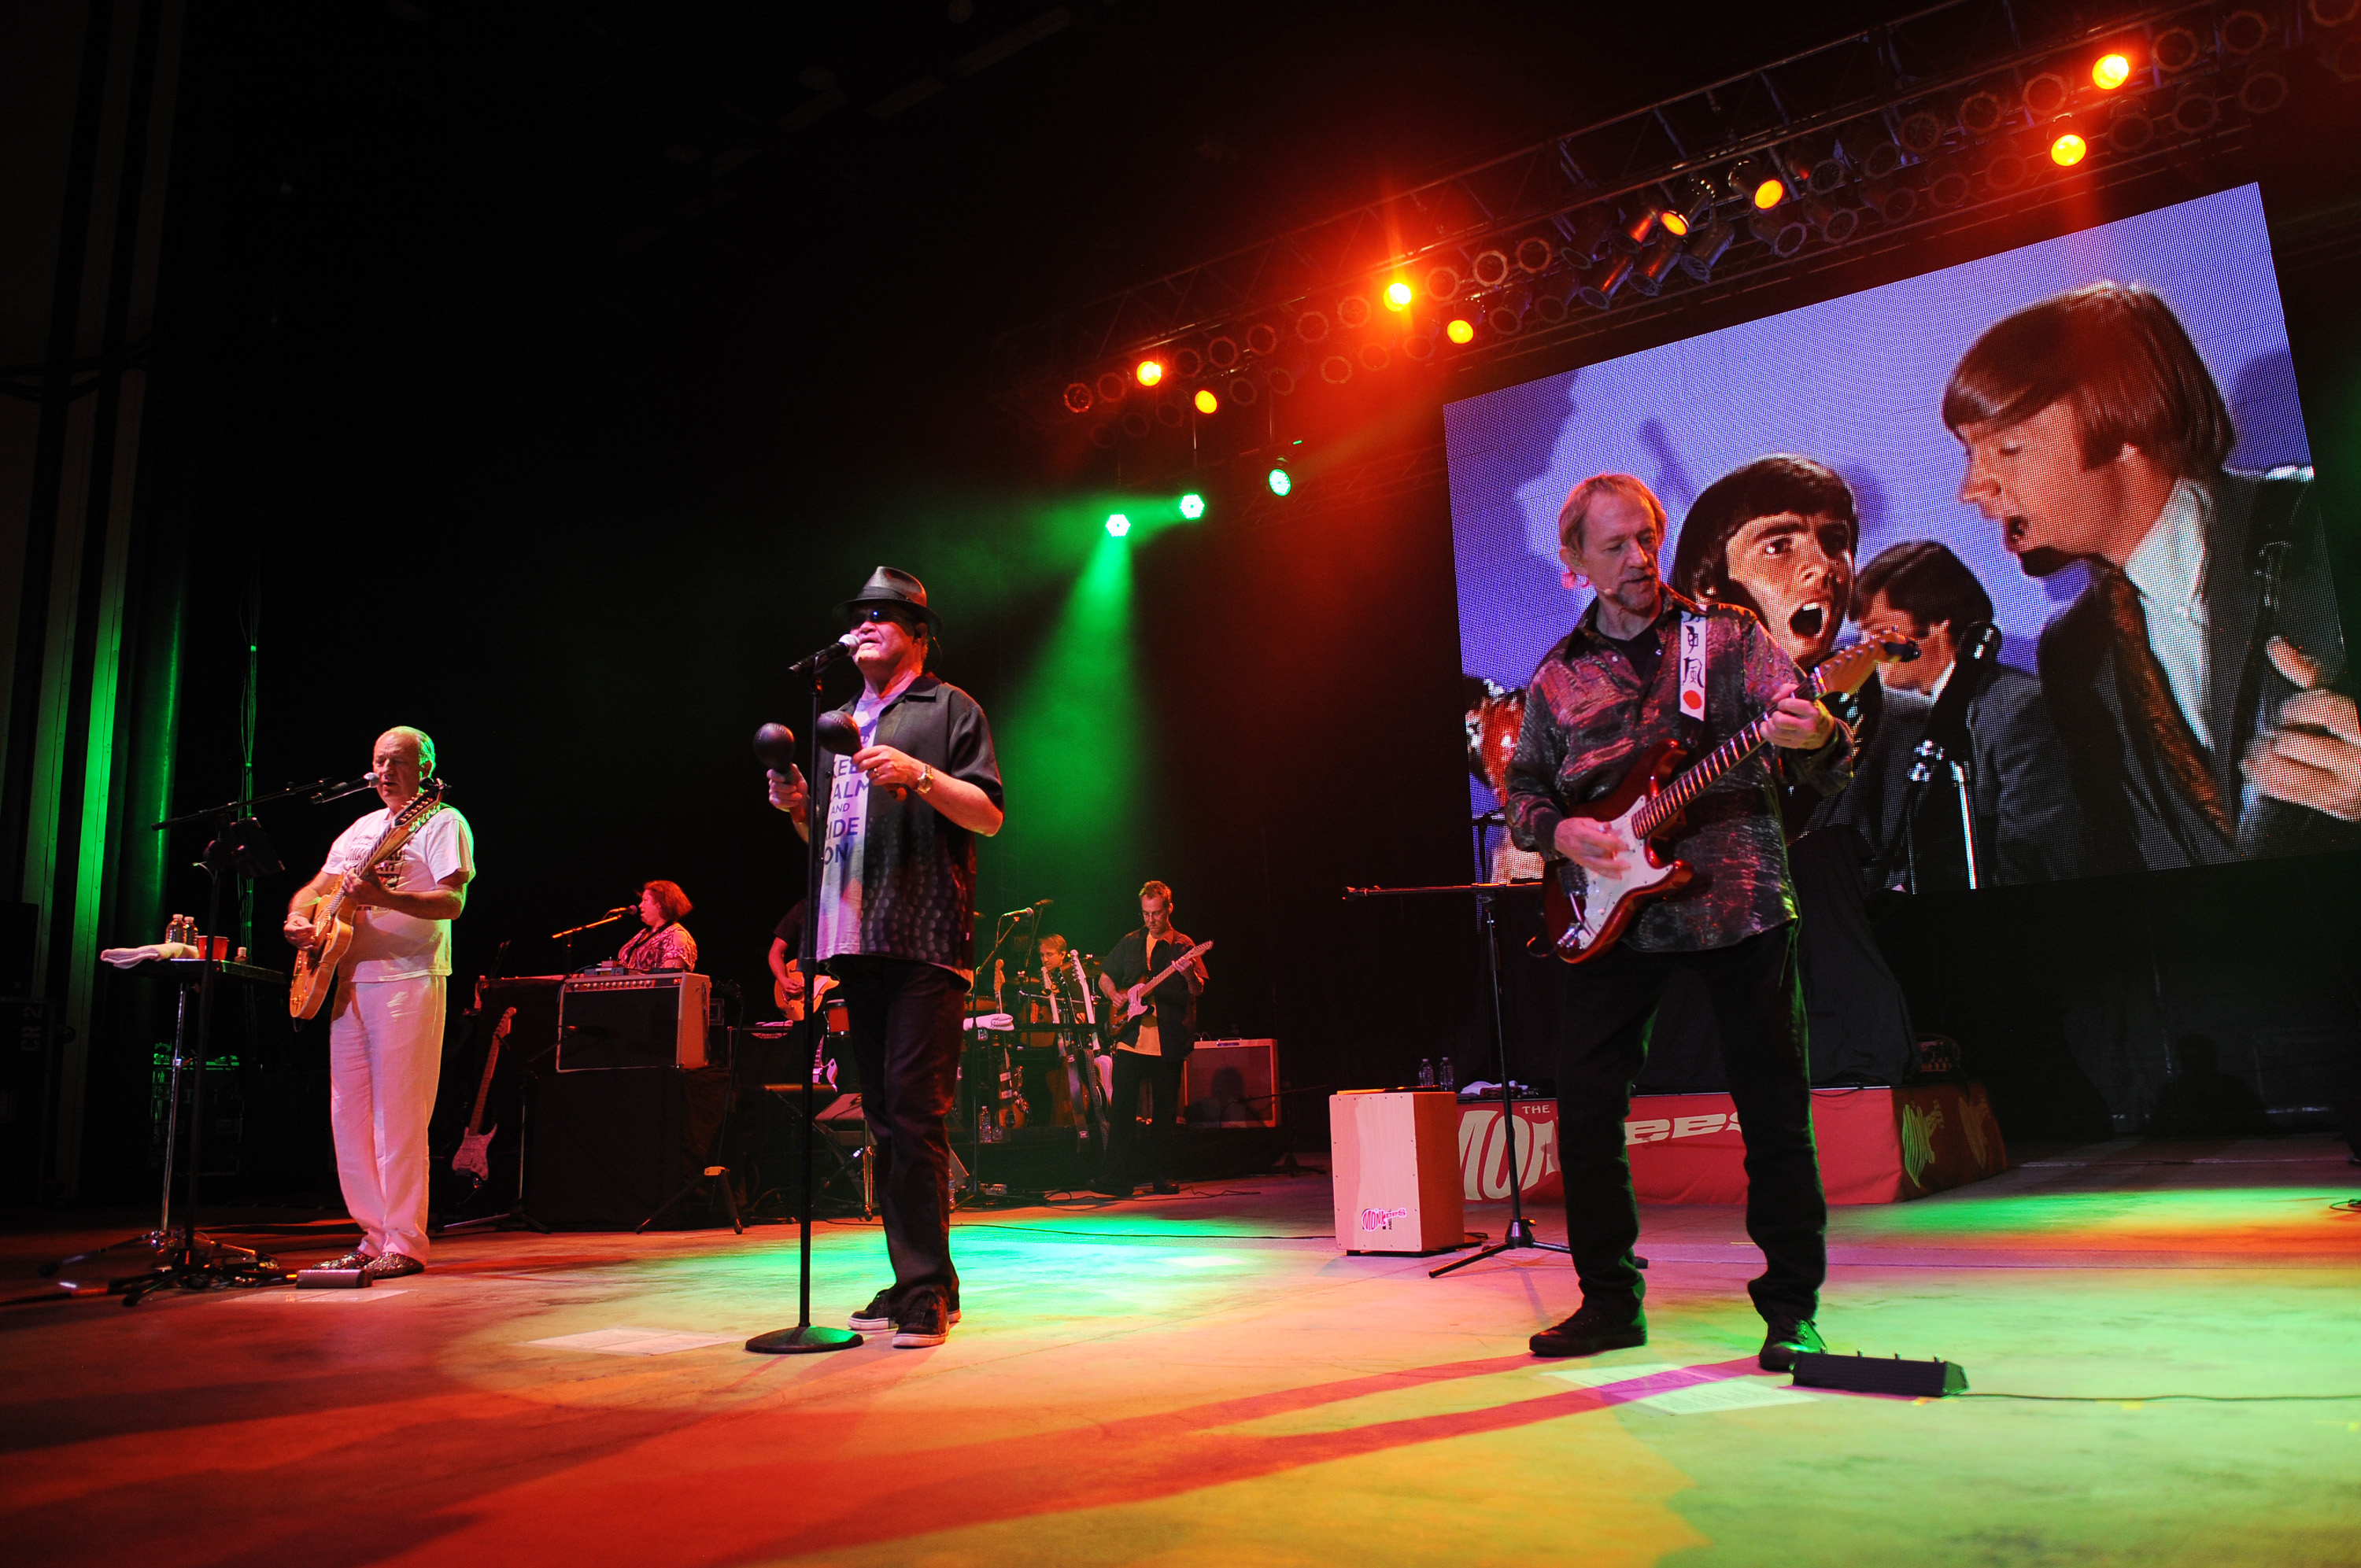 Michael Nesmith, Micky Dolenz and Peter Tork of The Monkees perform during the Mid Summers Night Tour at the Mizner Park Amphitheater, July 27, 2013 in Boca Raton, Fla. (Jeff Daly—Invision/AP)